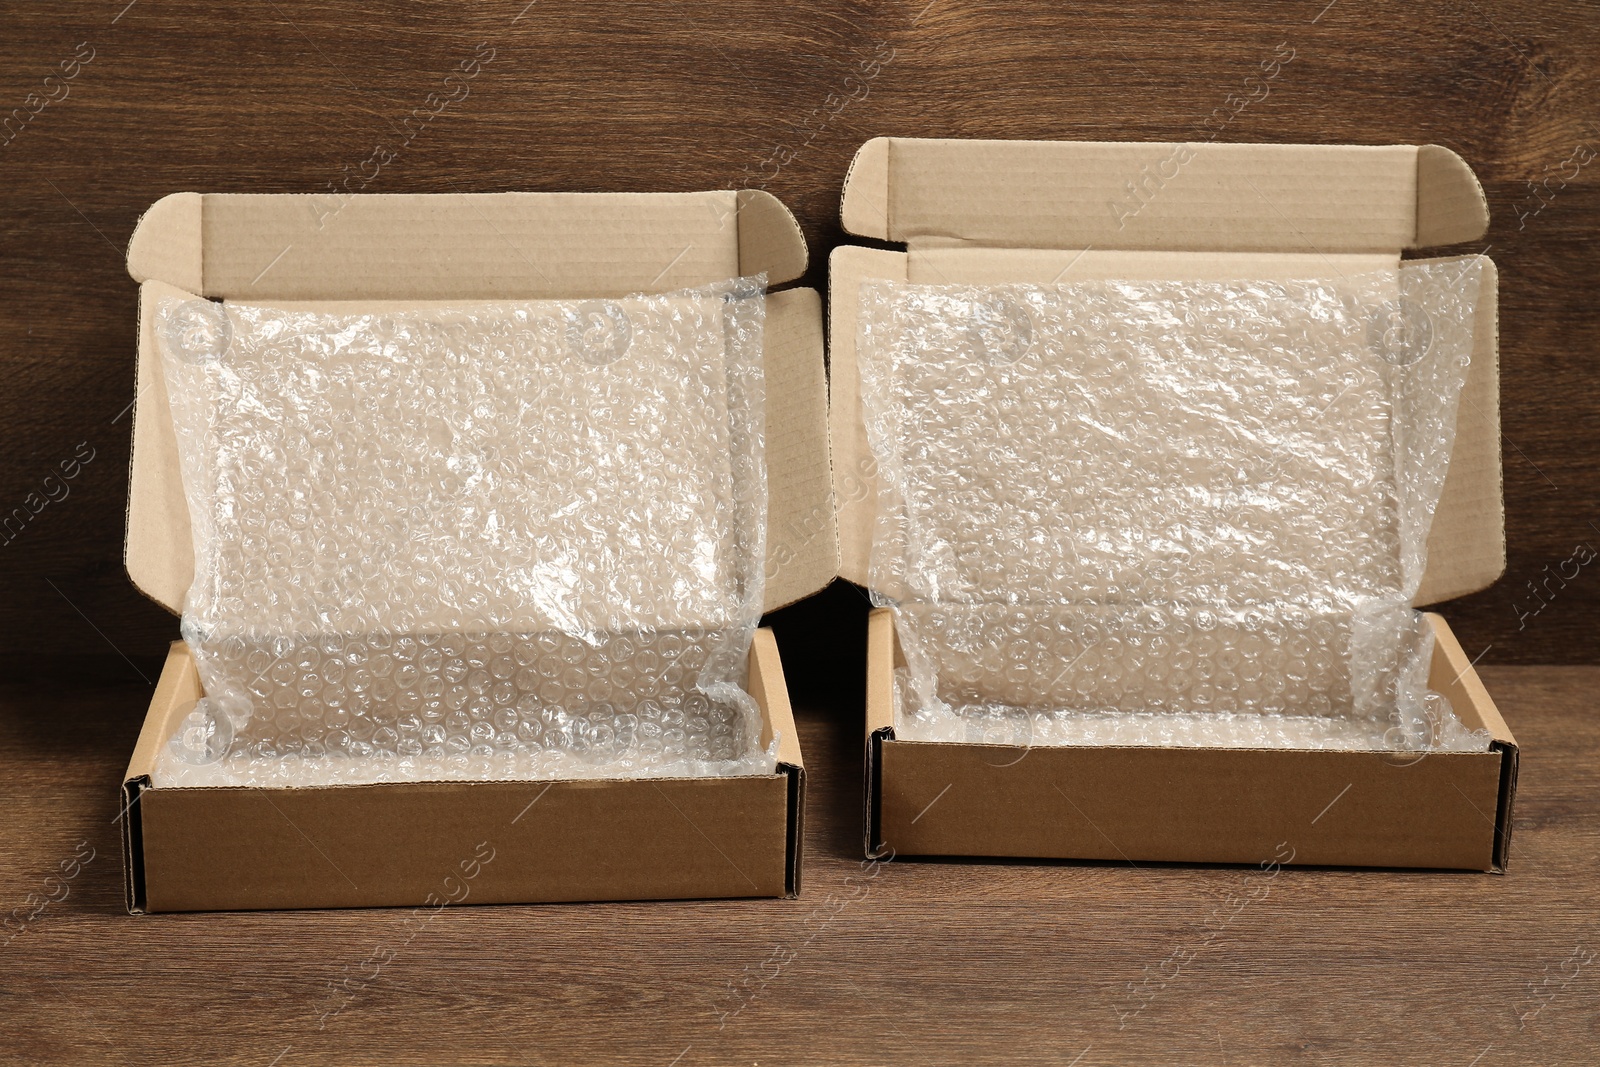 Photo of Open cardboard boxes with bubble wrap on wooden table